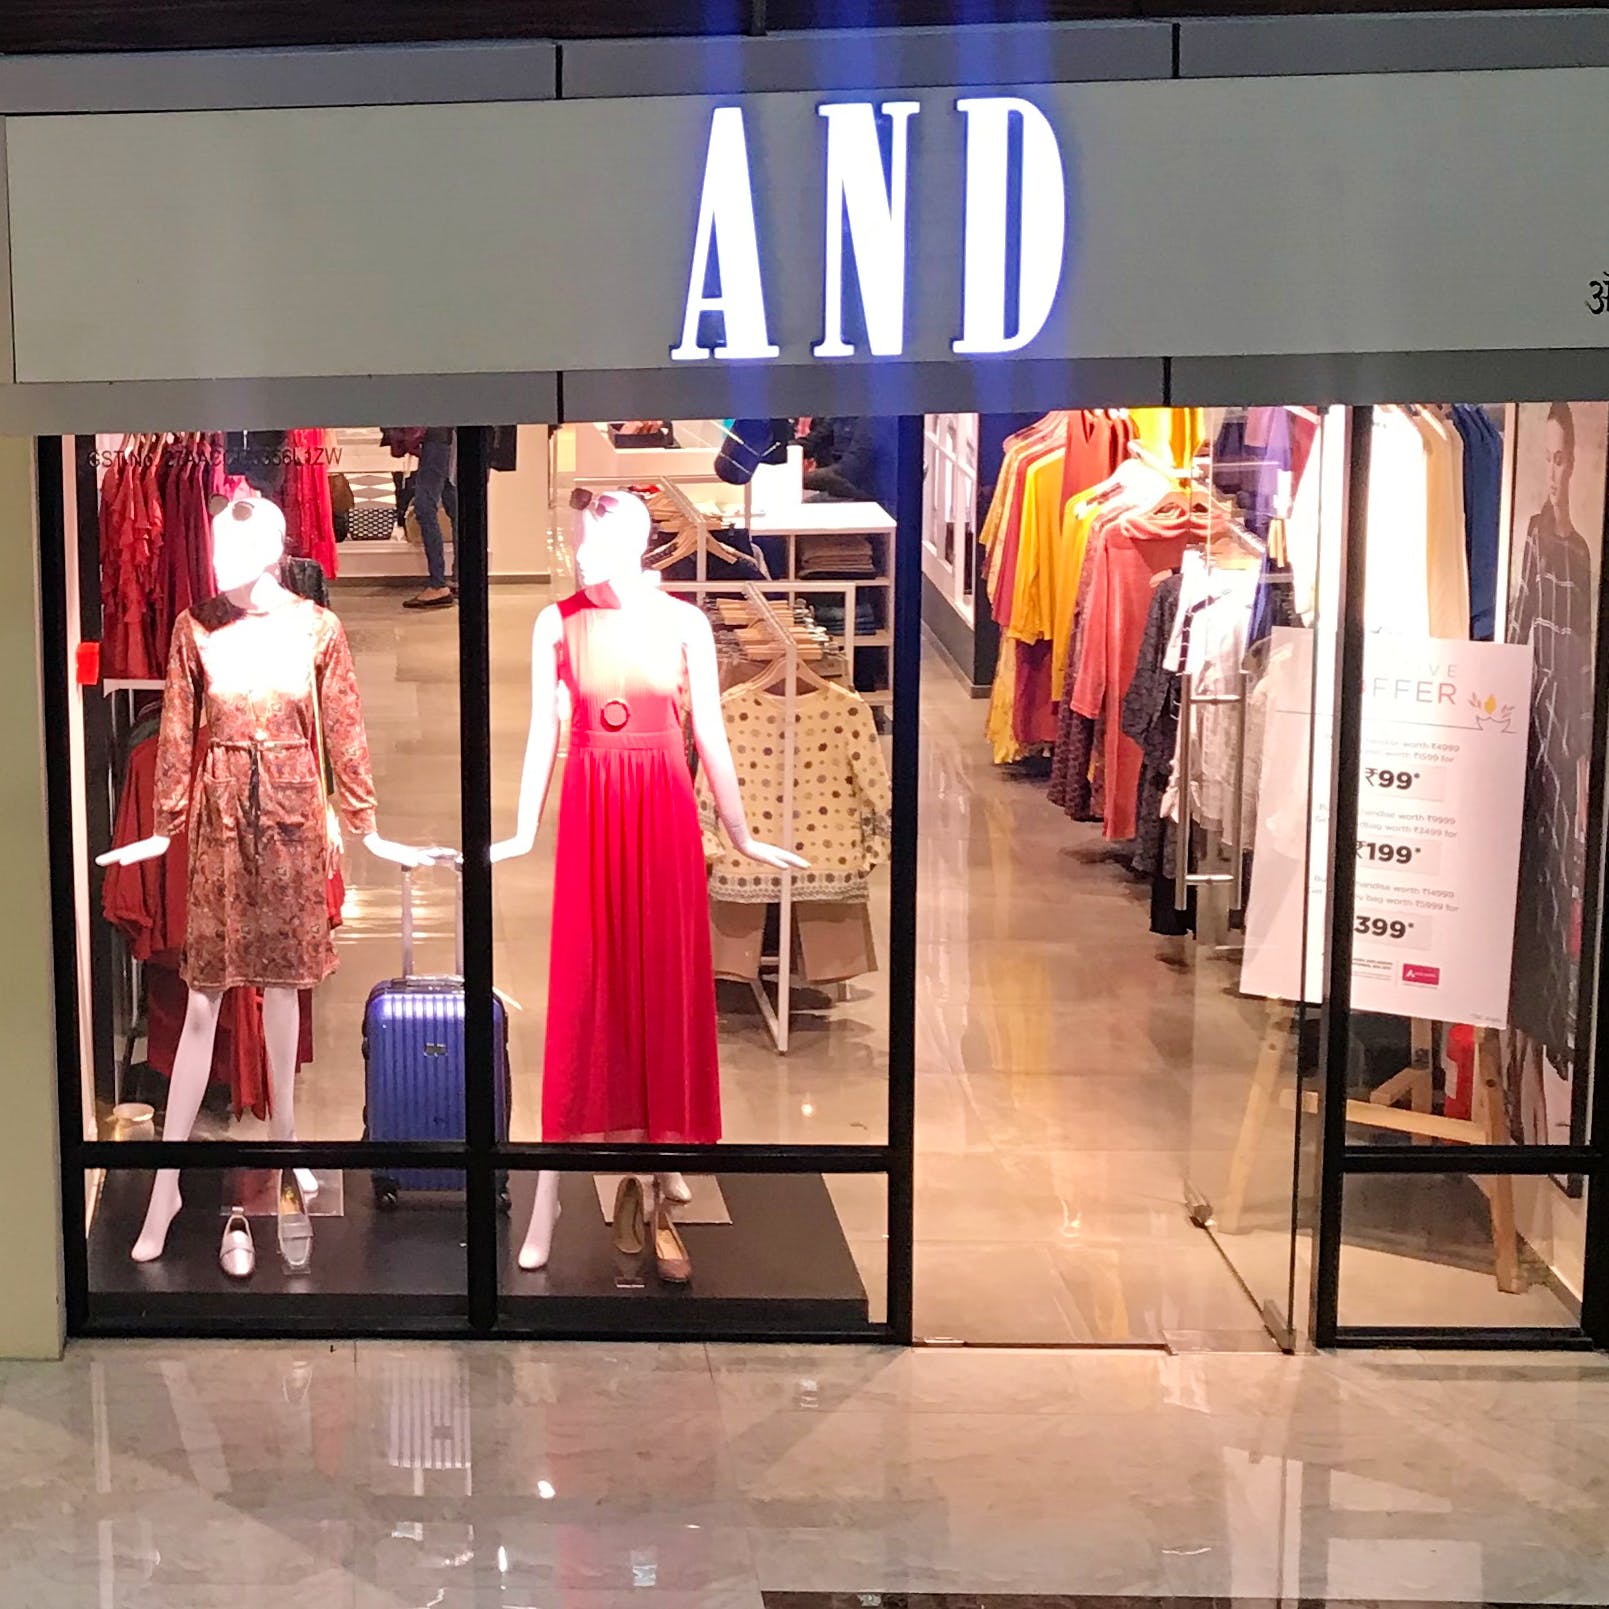 Boutique,Clothing,Display window,Fashion,Outlet store,Pink,Dress,Retail,Display case,Display device